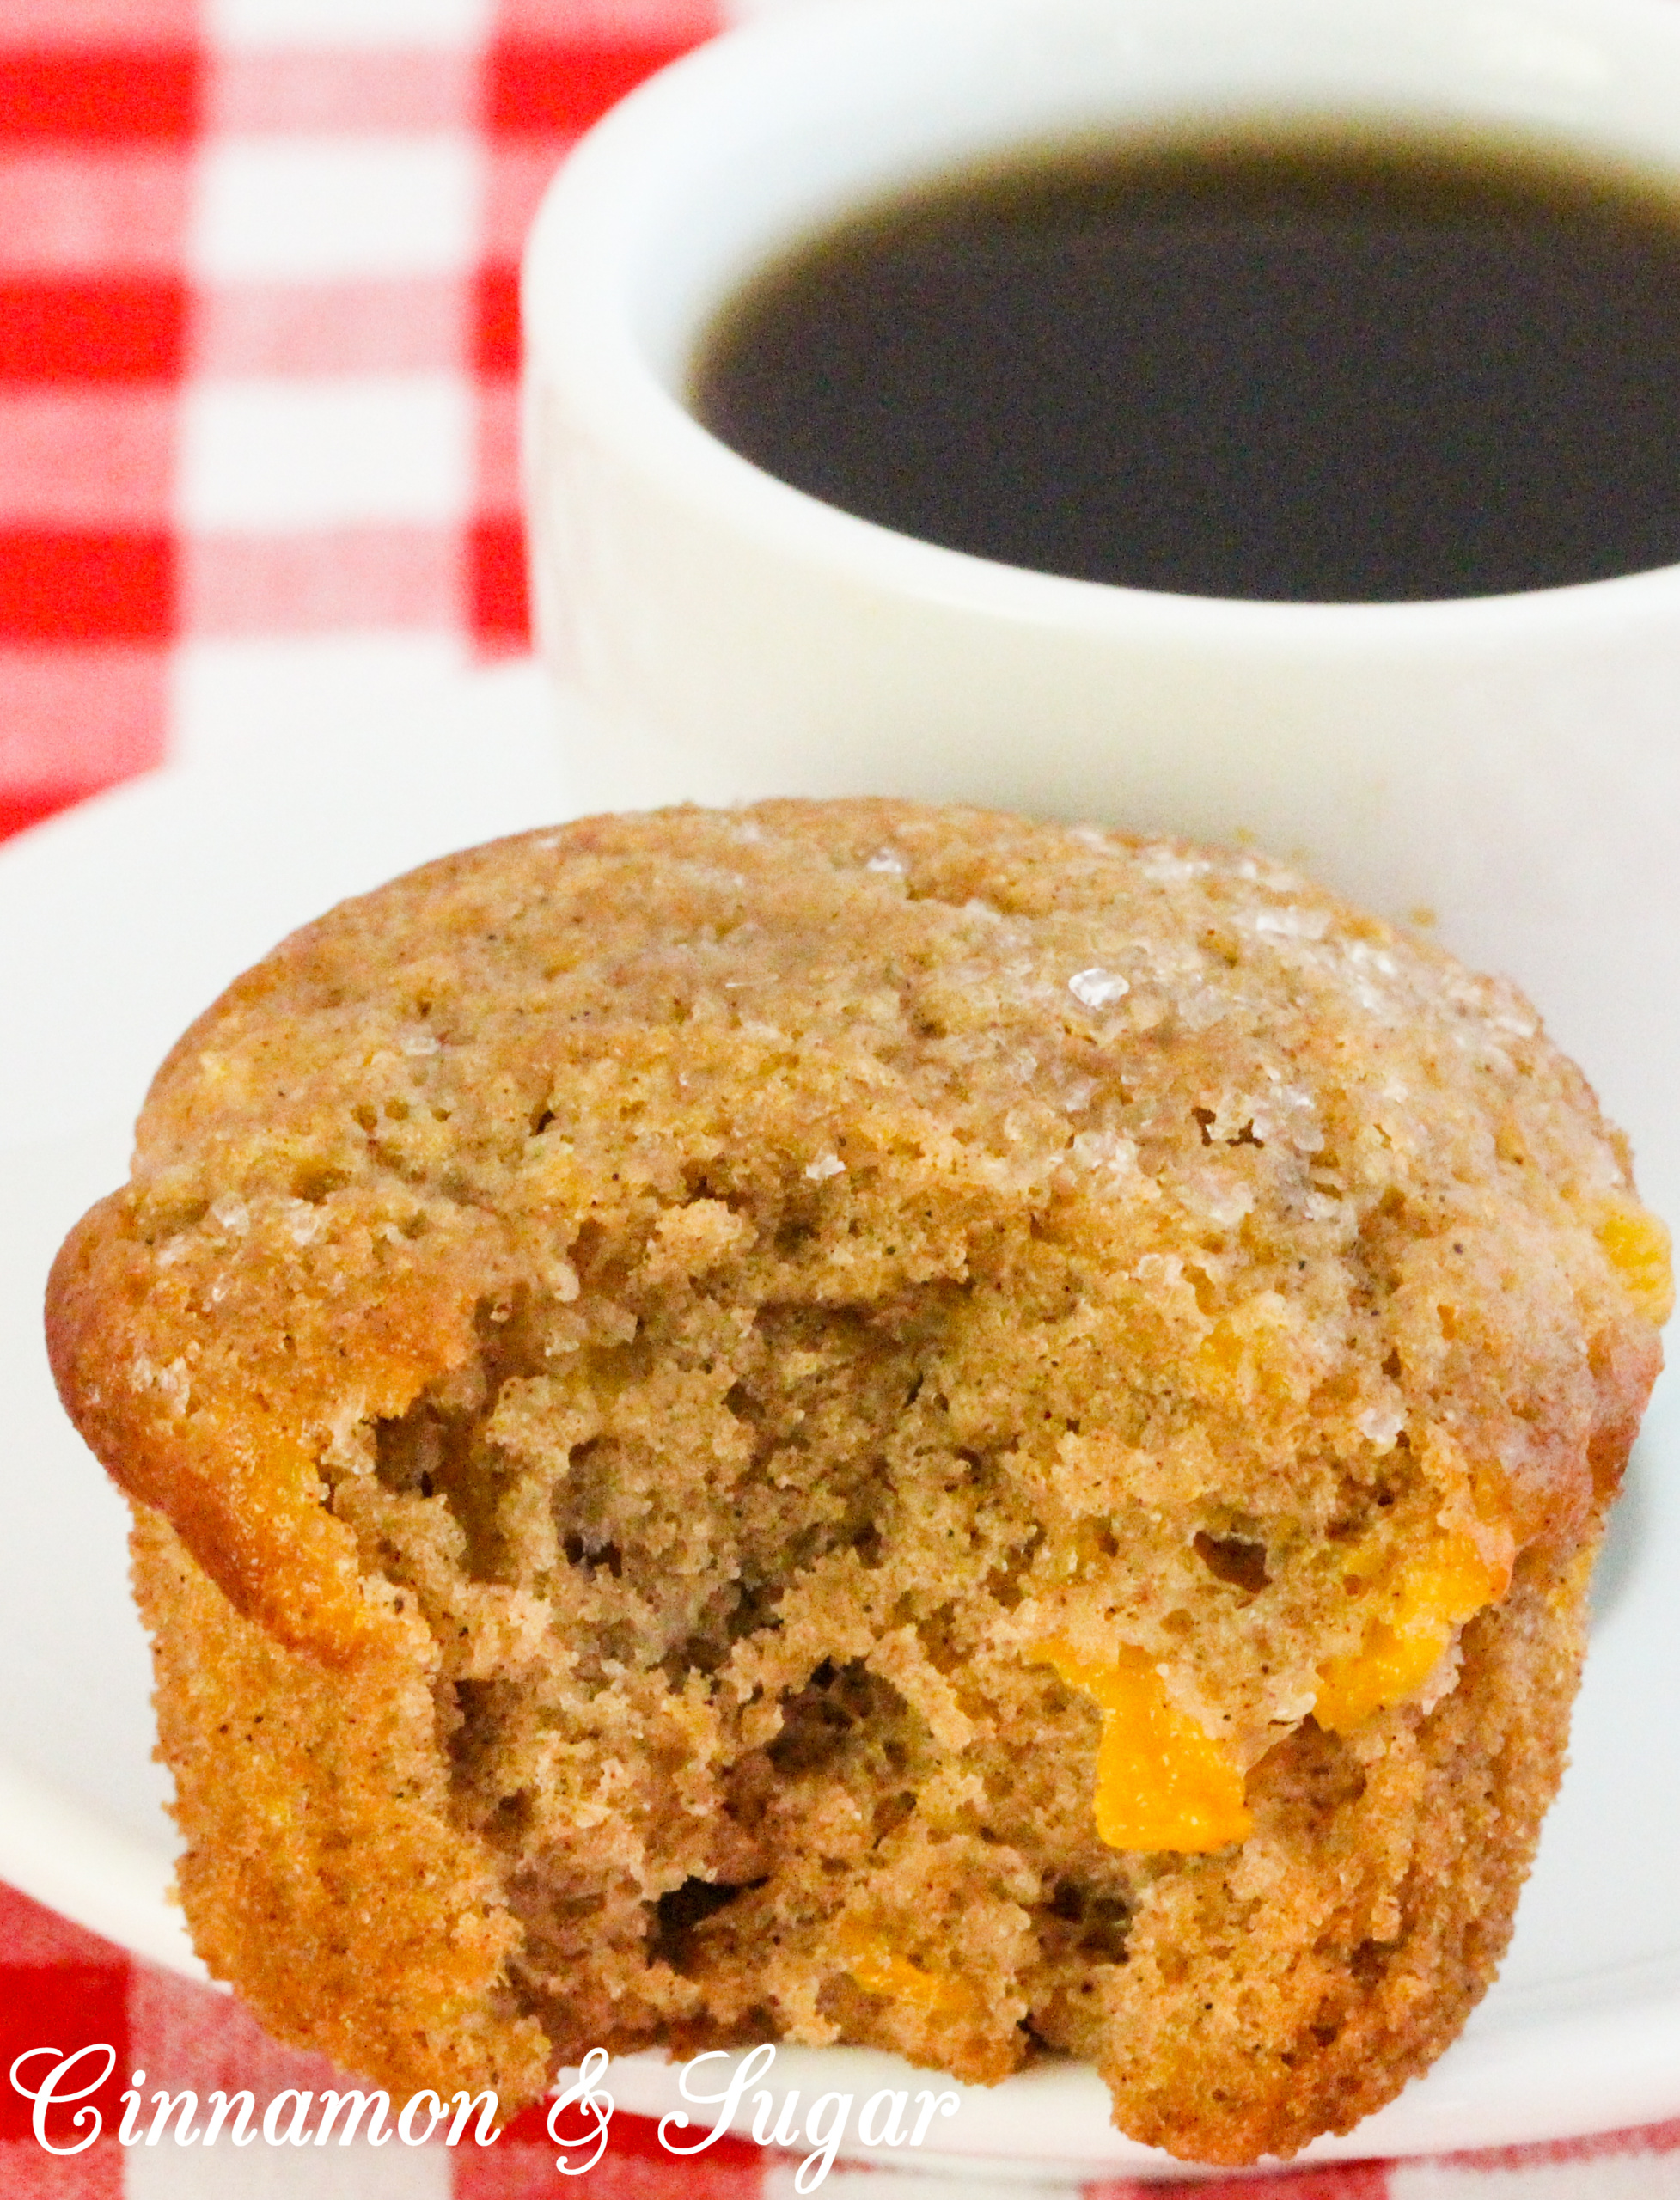 Chock-full of peaches these Peach Muffins mix up quickly without any fuss. Canned peaches even work when fresh aren’t available which makes this recipe convenient year round. Recipe shared with permission granted by Kate Young, author of SOUTHERN SASS AND A CRISPY CORPSE.